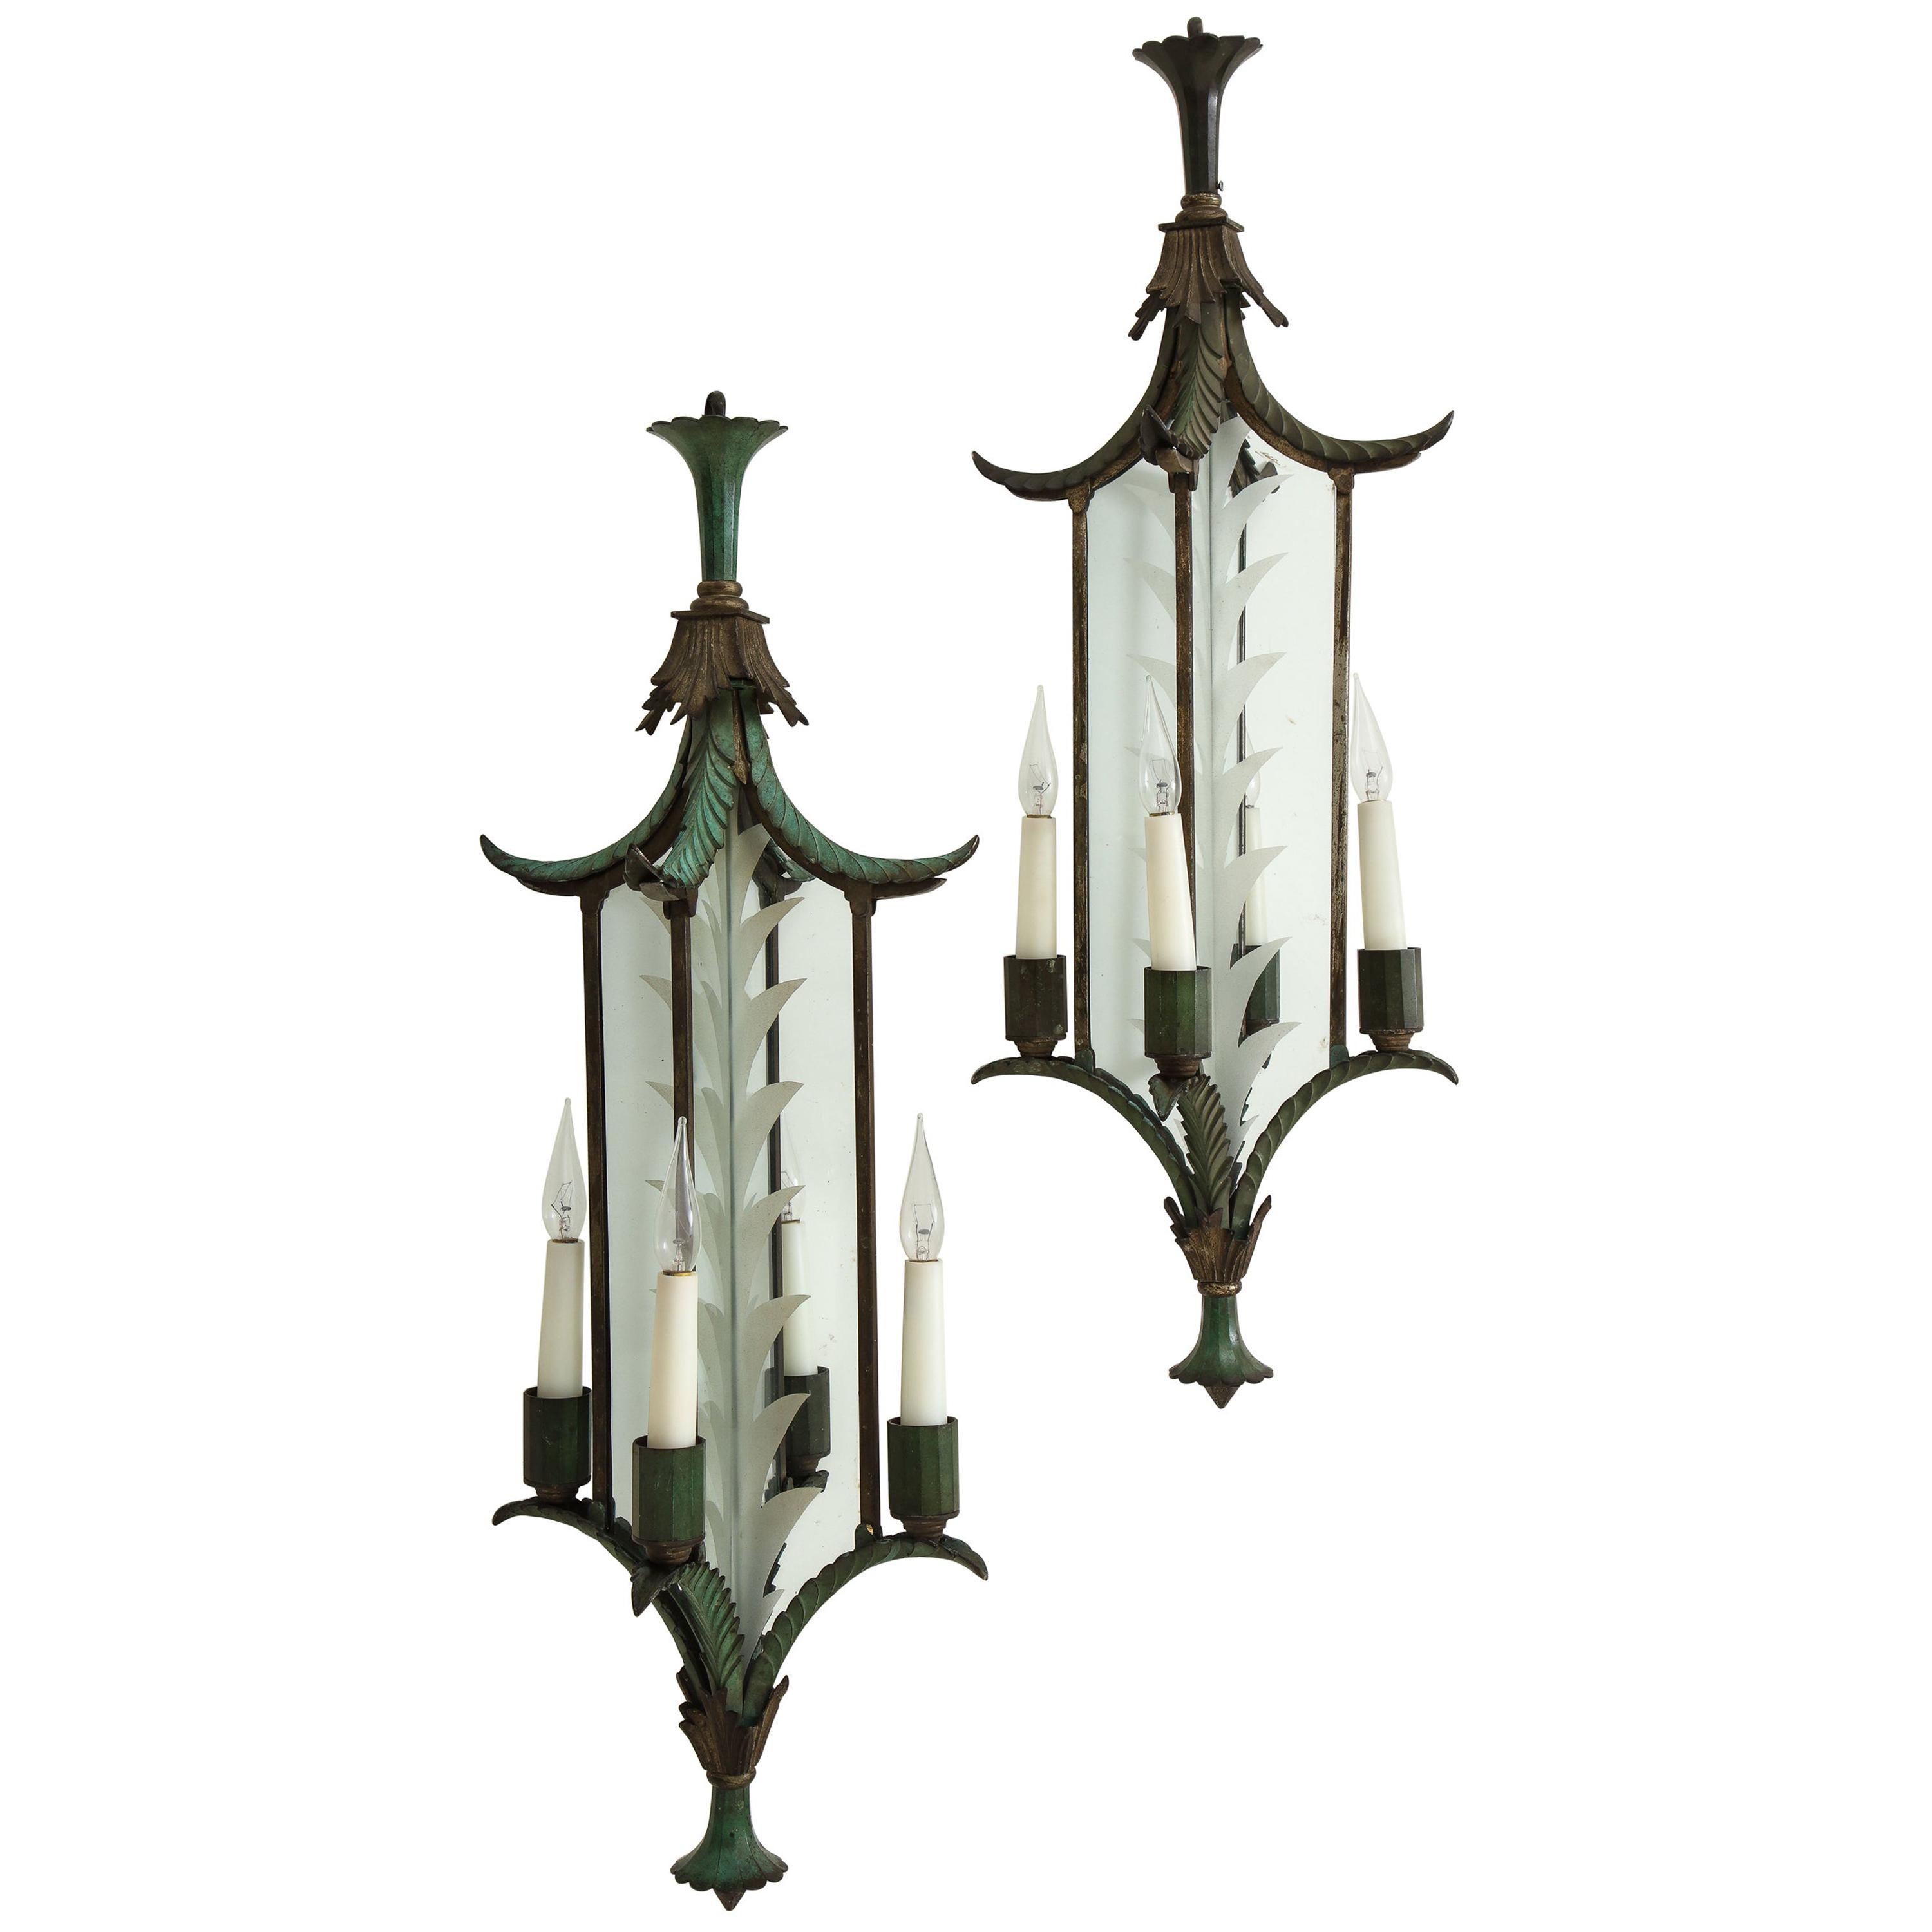 Pair of Green and Gilt-Painted Bronze and Glass Hanging Lanterns